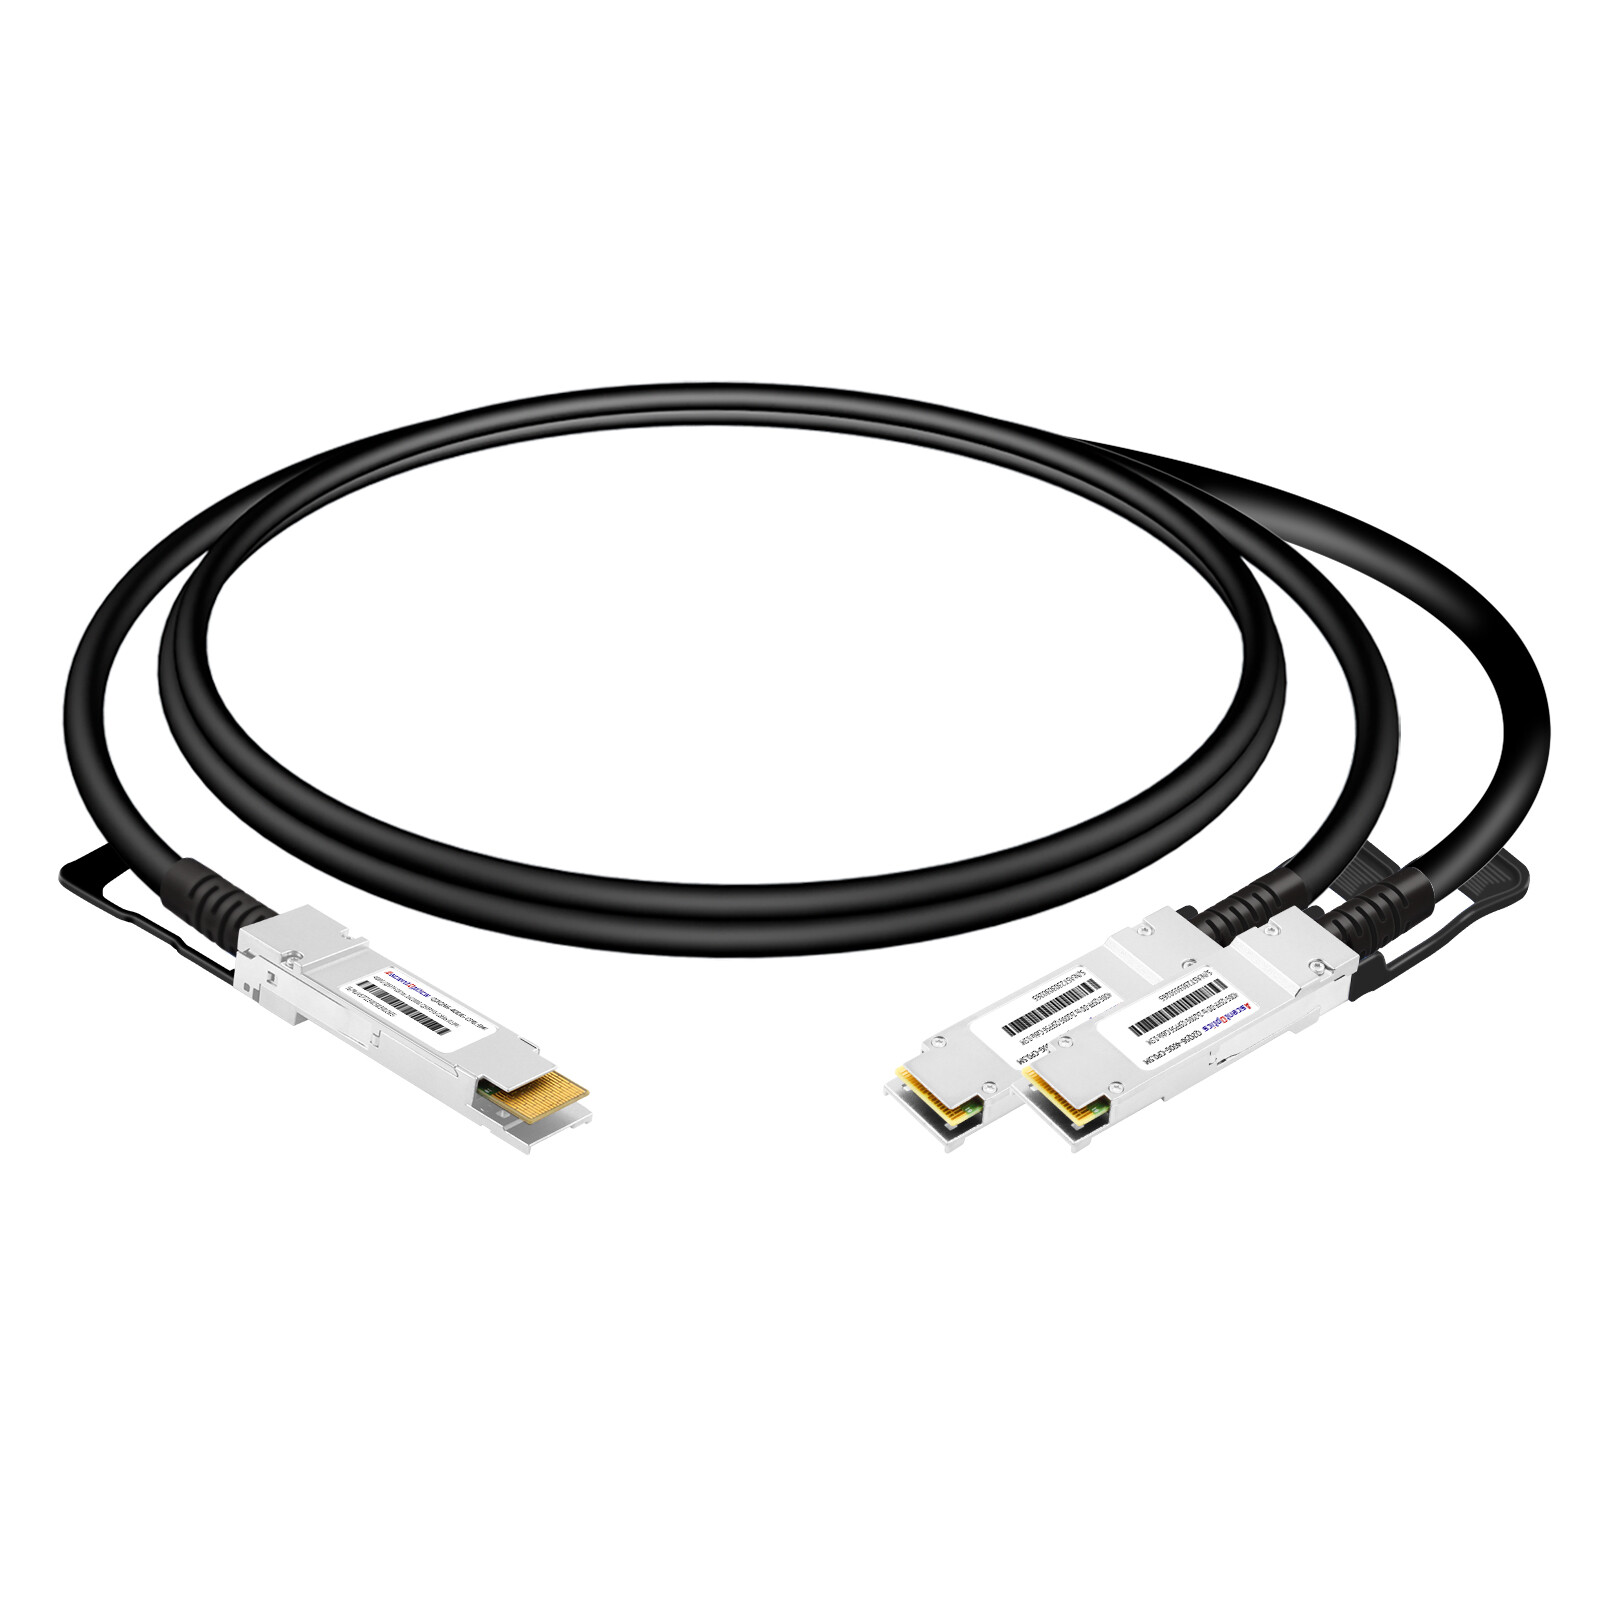 400G QSFP-DD to 4x 100G SFP-DD Copper Breakout Cable,3 Meters,Passive